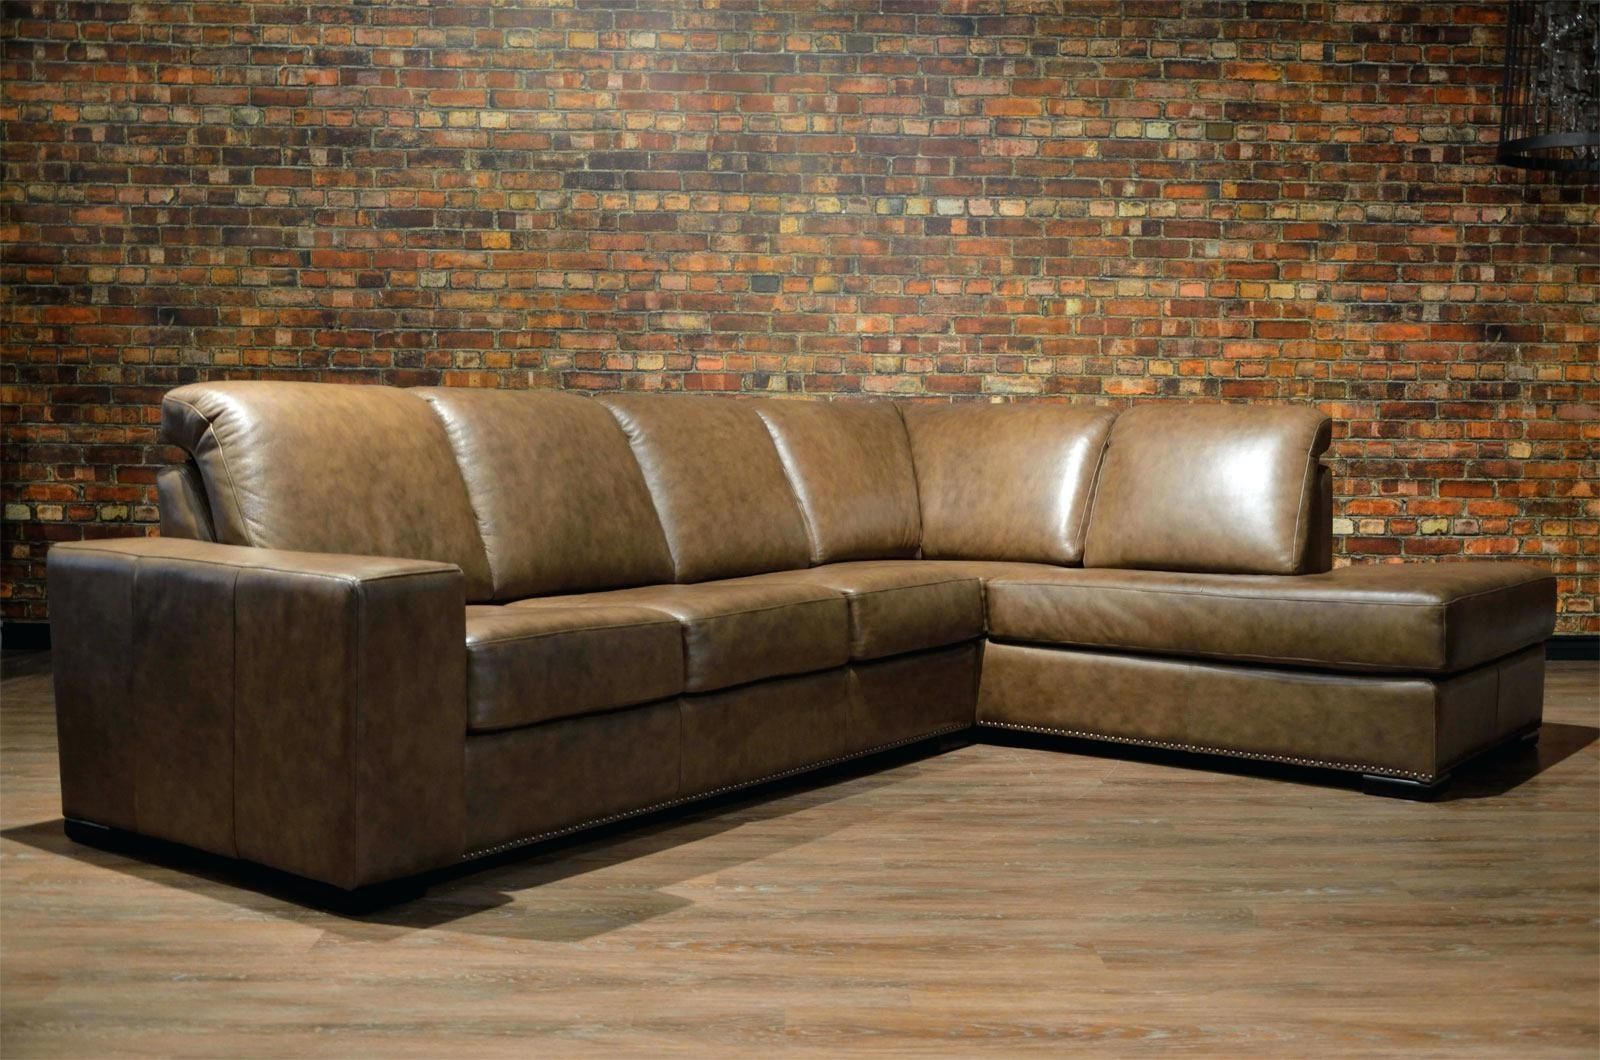 Used Leather Couches For Sale Ncgeconference With Canada Sale Sectional Sofas 